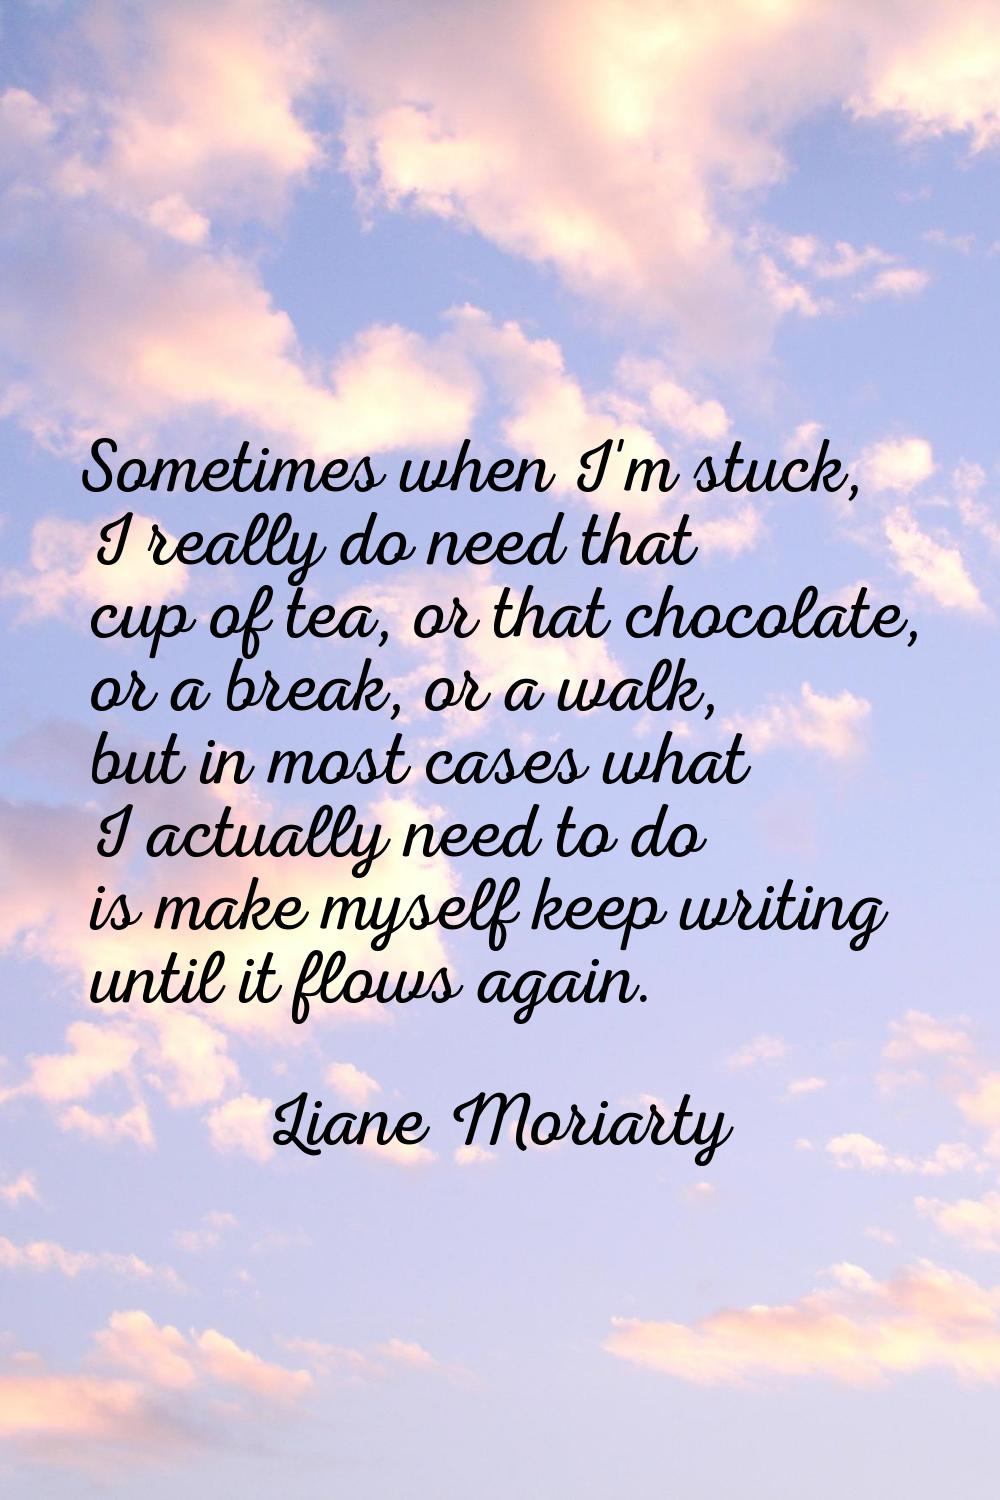 Sometimes when I'm stuck, I really do need that cup of tea, or that chocolate, or a break, or a wal